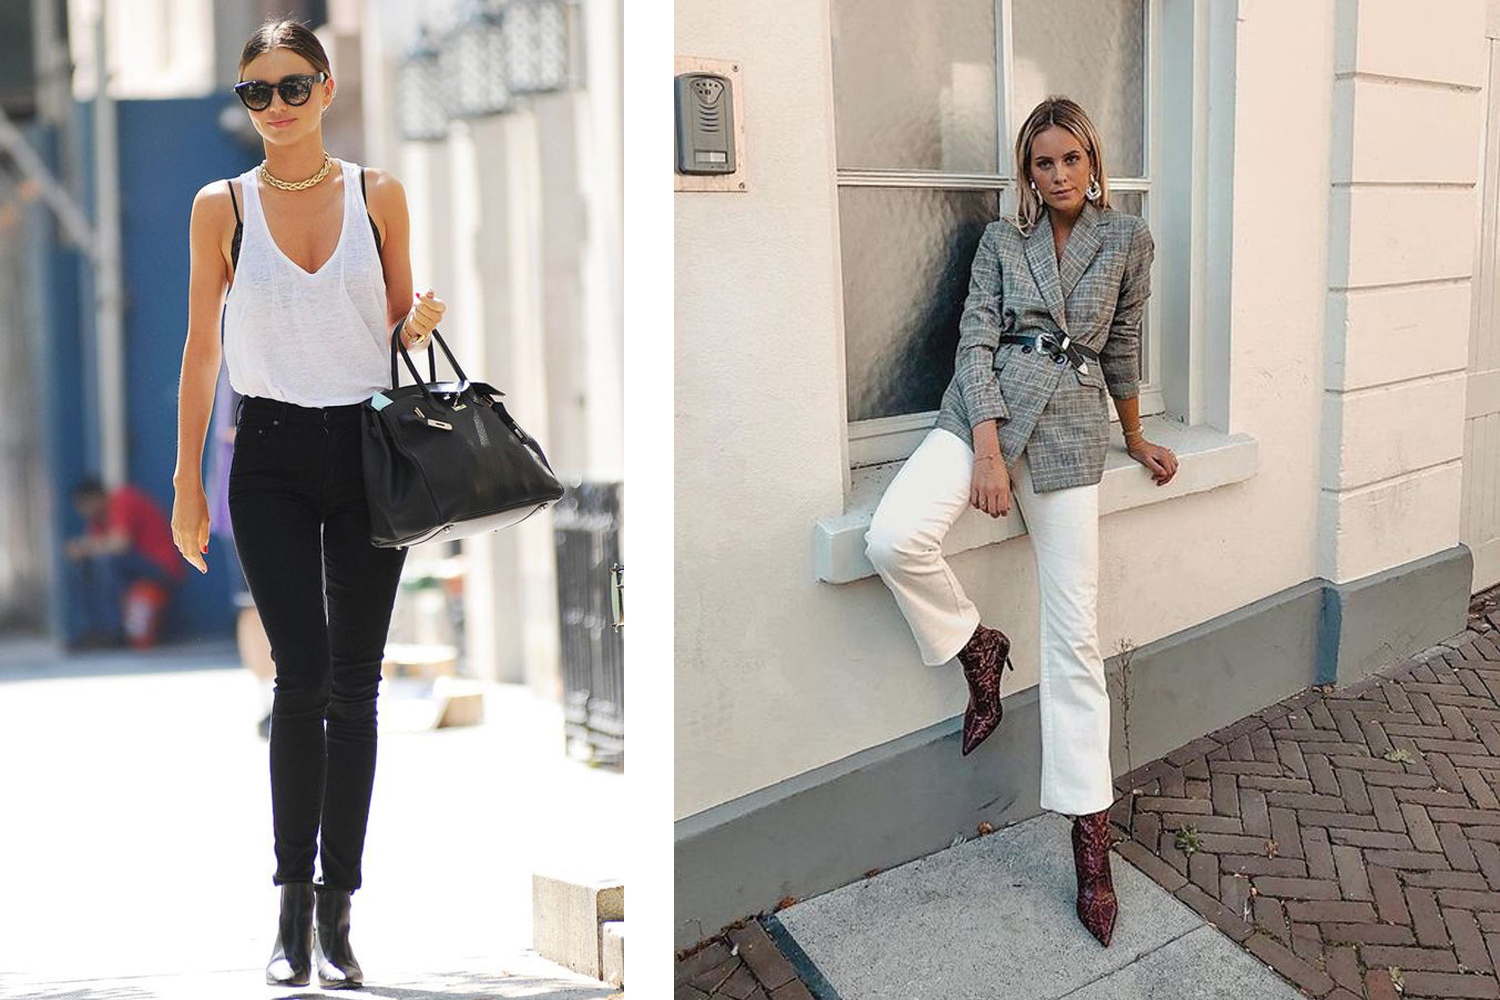 Le Fashion: A Chic Look to Put Together With Easy Basics